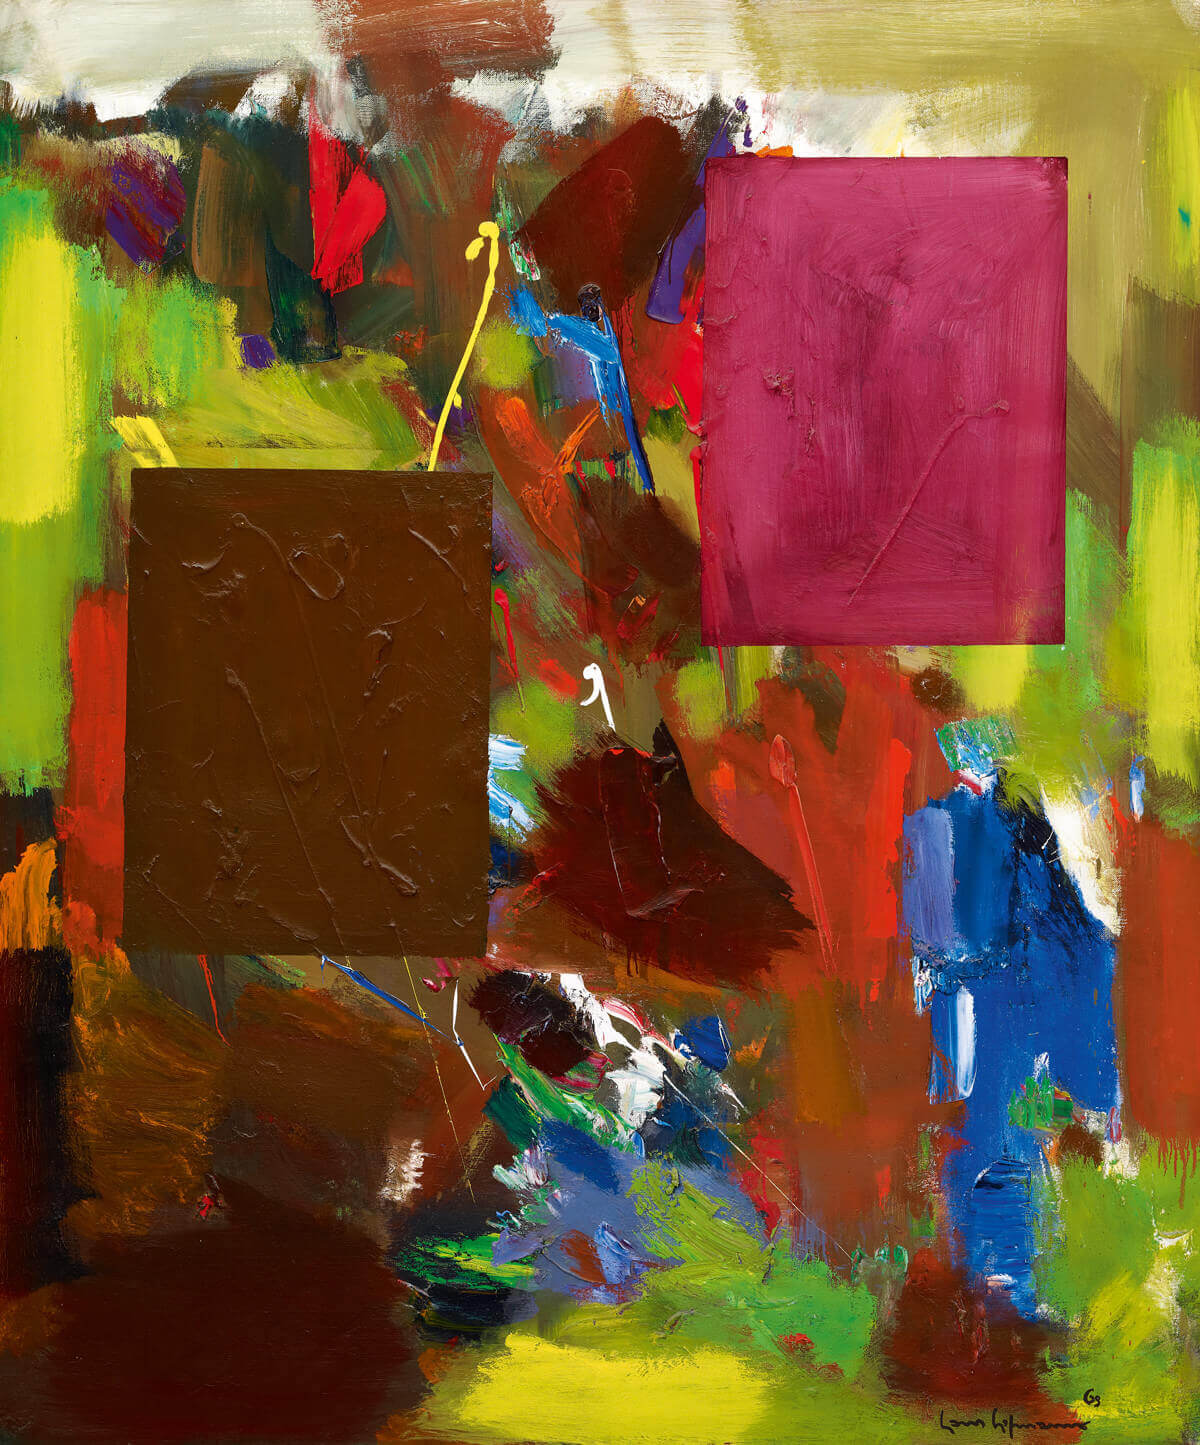 Hans Hofmann, In Sober Ecstasy, 1965 (Private collection/© ARS, NY and DACS, London 2016)